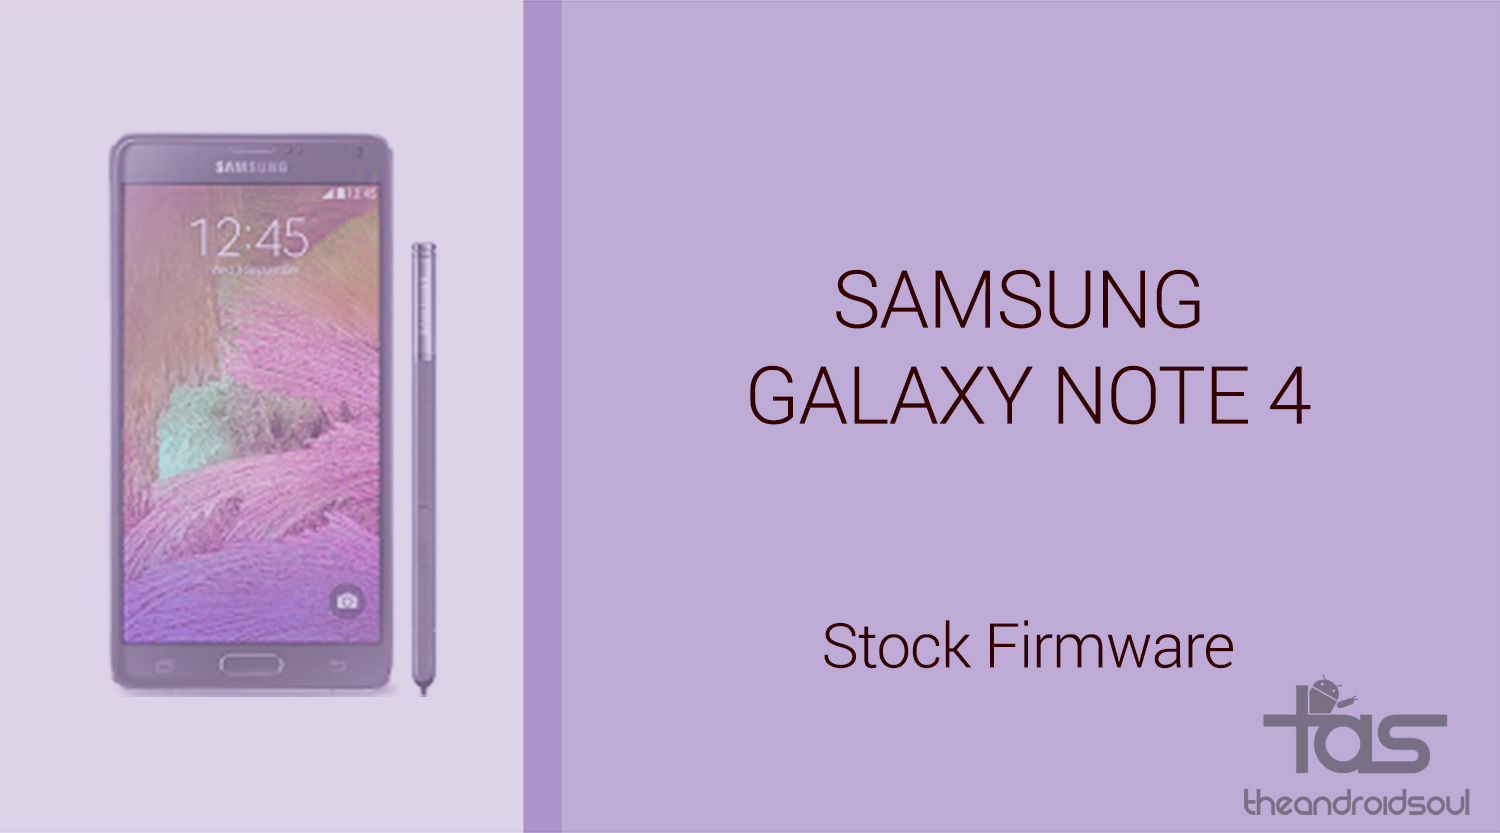 stock rom 6.0.1 note 4 at&t android